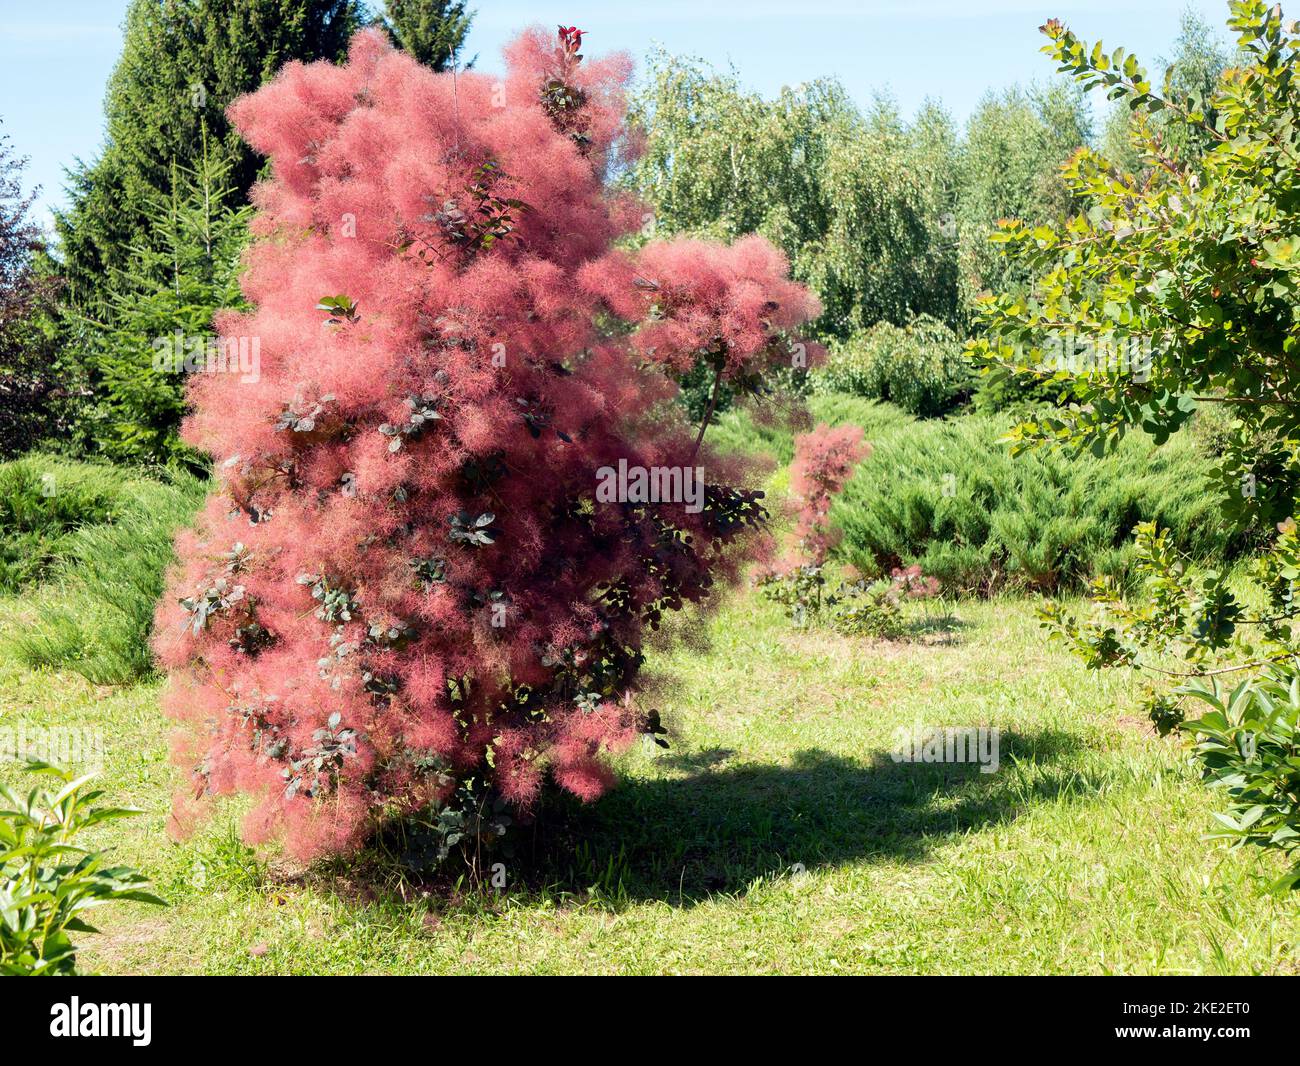 Shrub of red Scumpia tree with feathery appearance in the botanical garden, selective focus Stock Photo